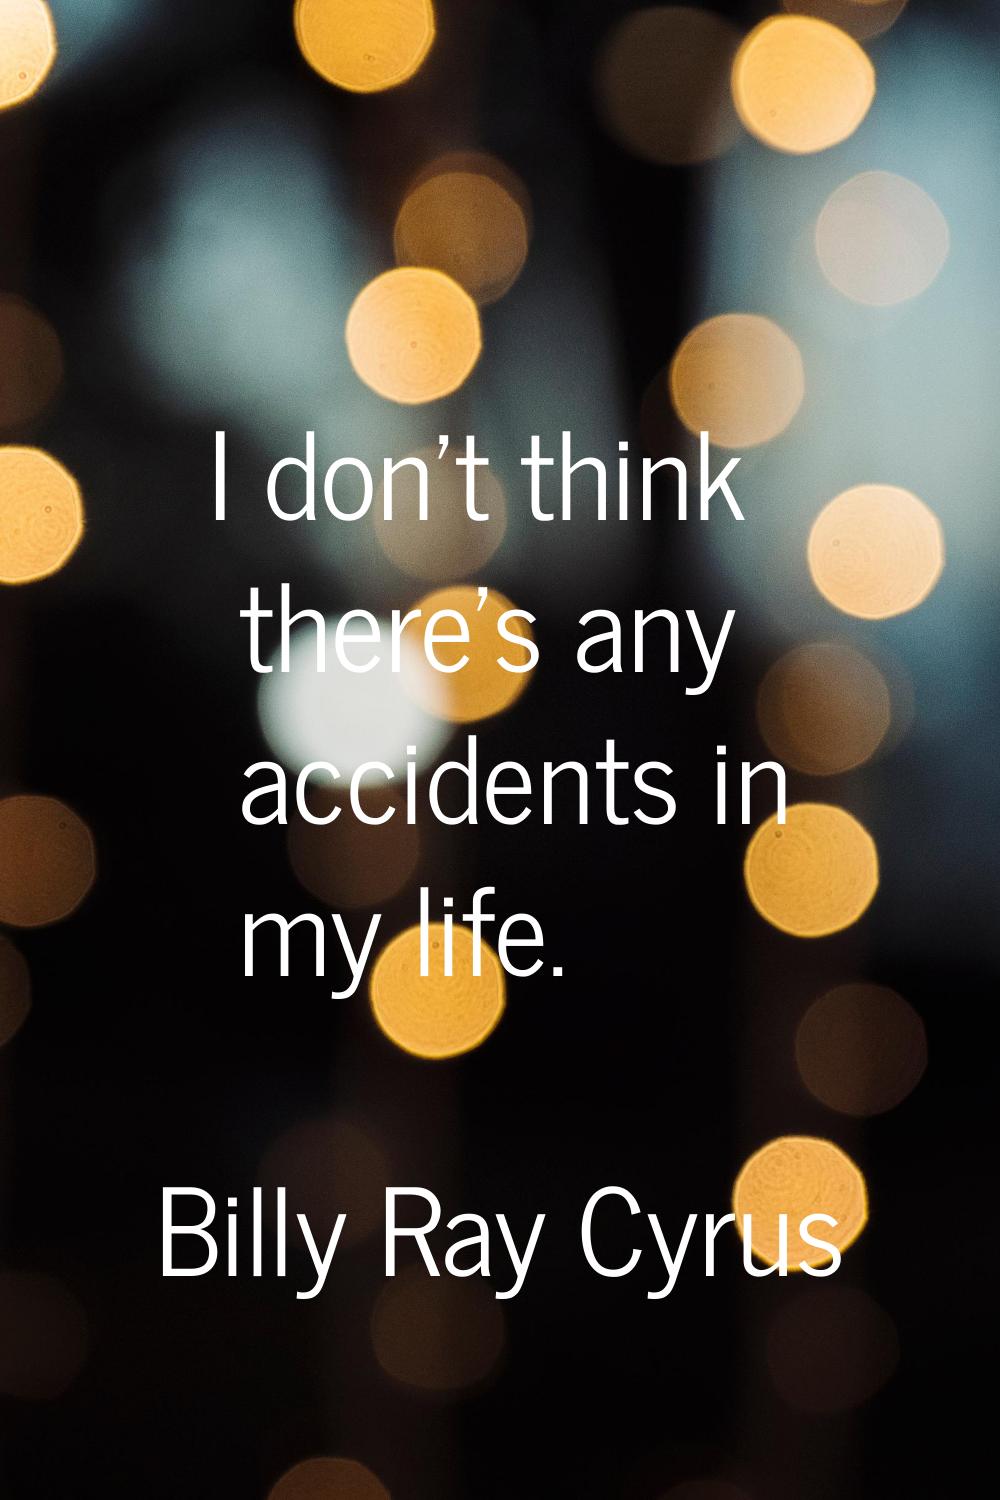 I don't think there's any accidents in my life.